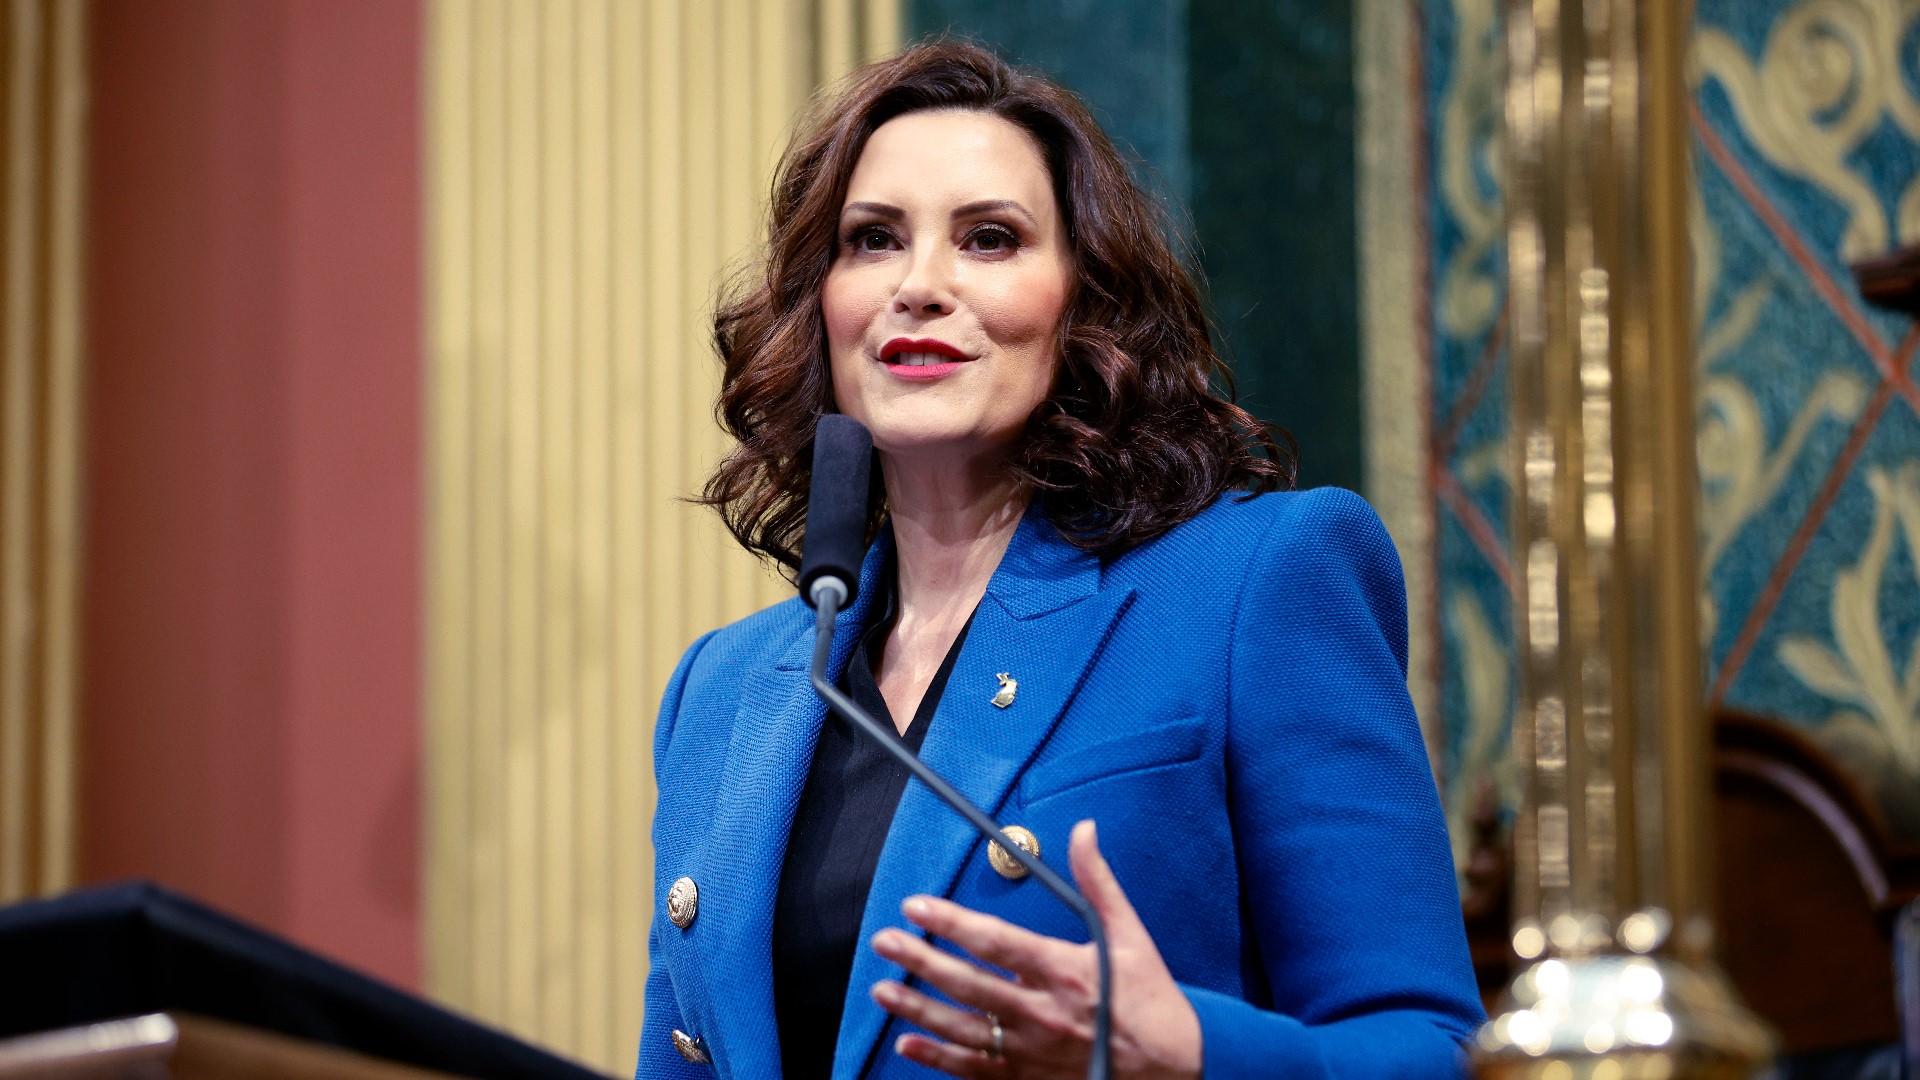 "Our plans are ambitious, but they are achievable. Let's get them done," Whitmer said in her speech as legislative leaders looked on.